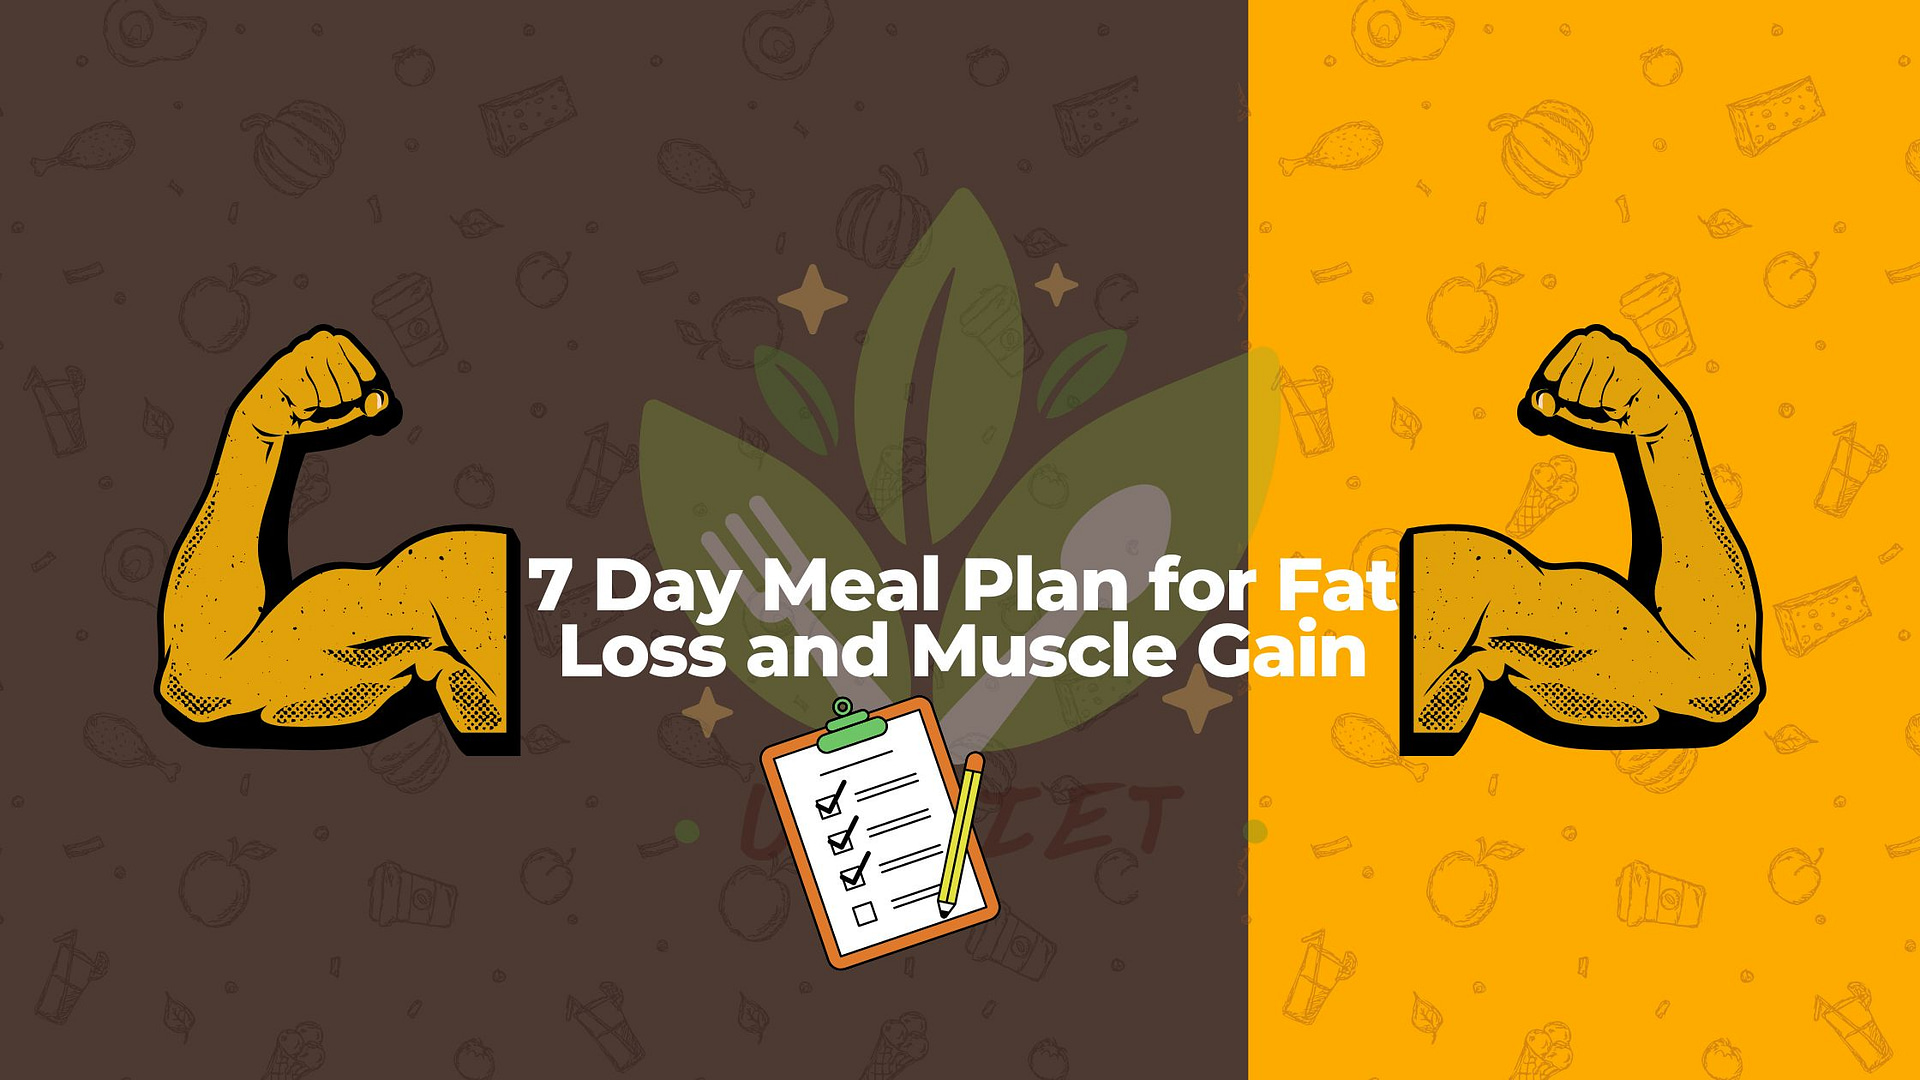 7 Day Meal Plan for Fat Loss and Muscle Gain